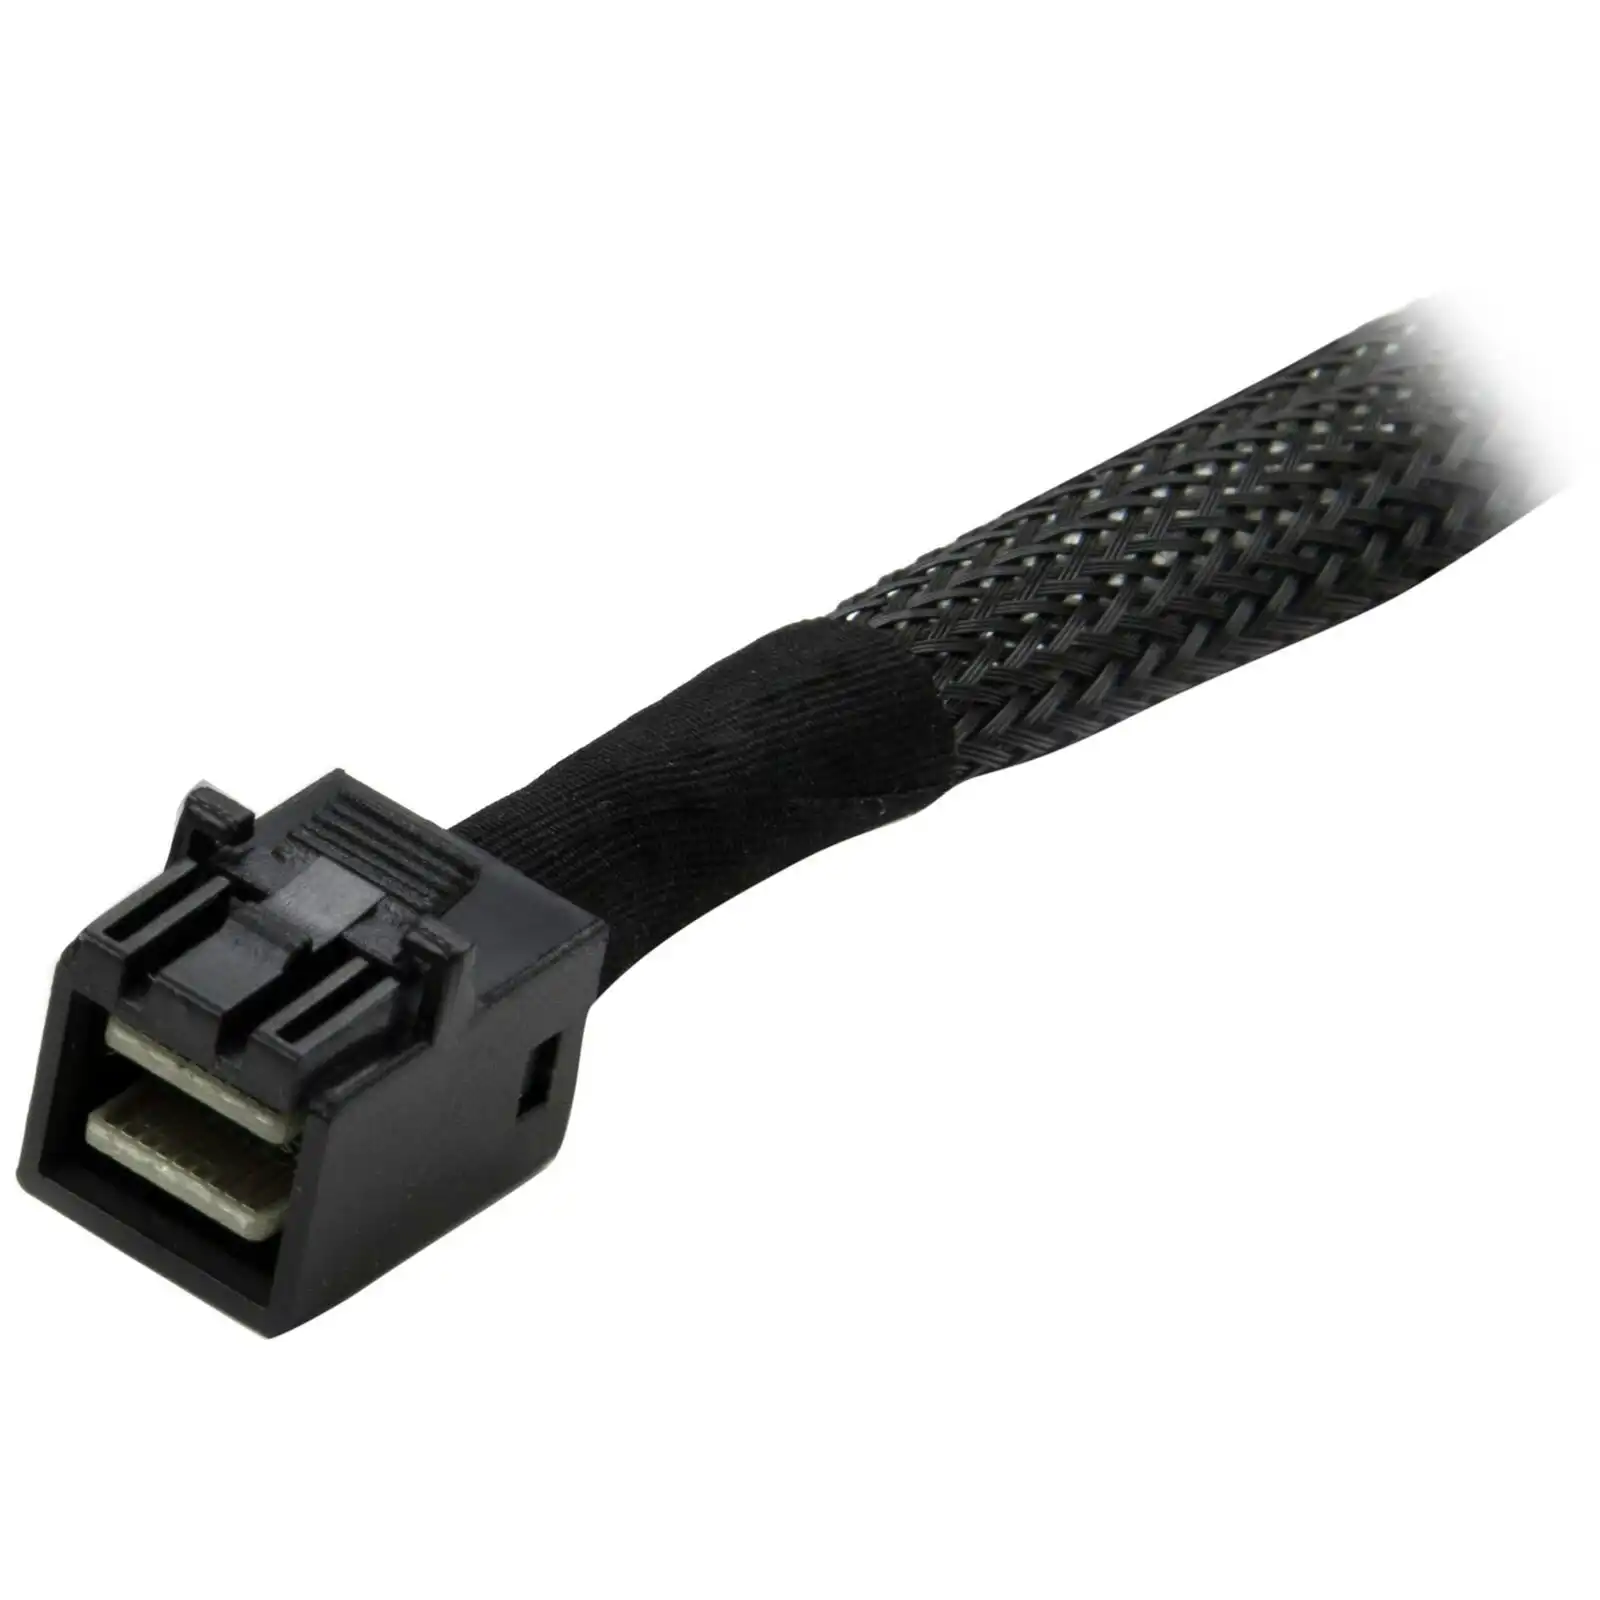 Star Tech 1m Straight Internal Mini-SAS Cable - SFF-8087 To SFF-8643 Black 6Gbps